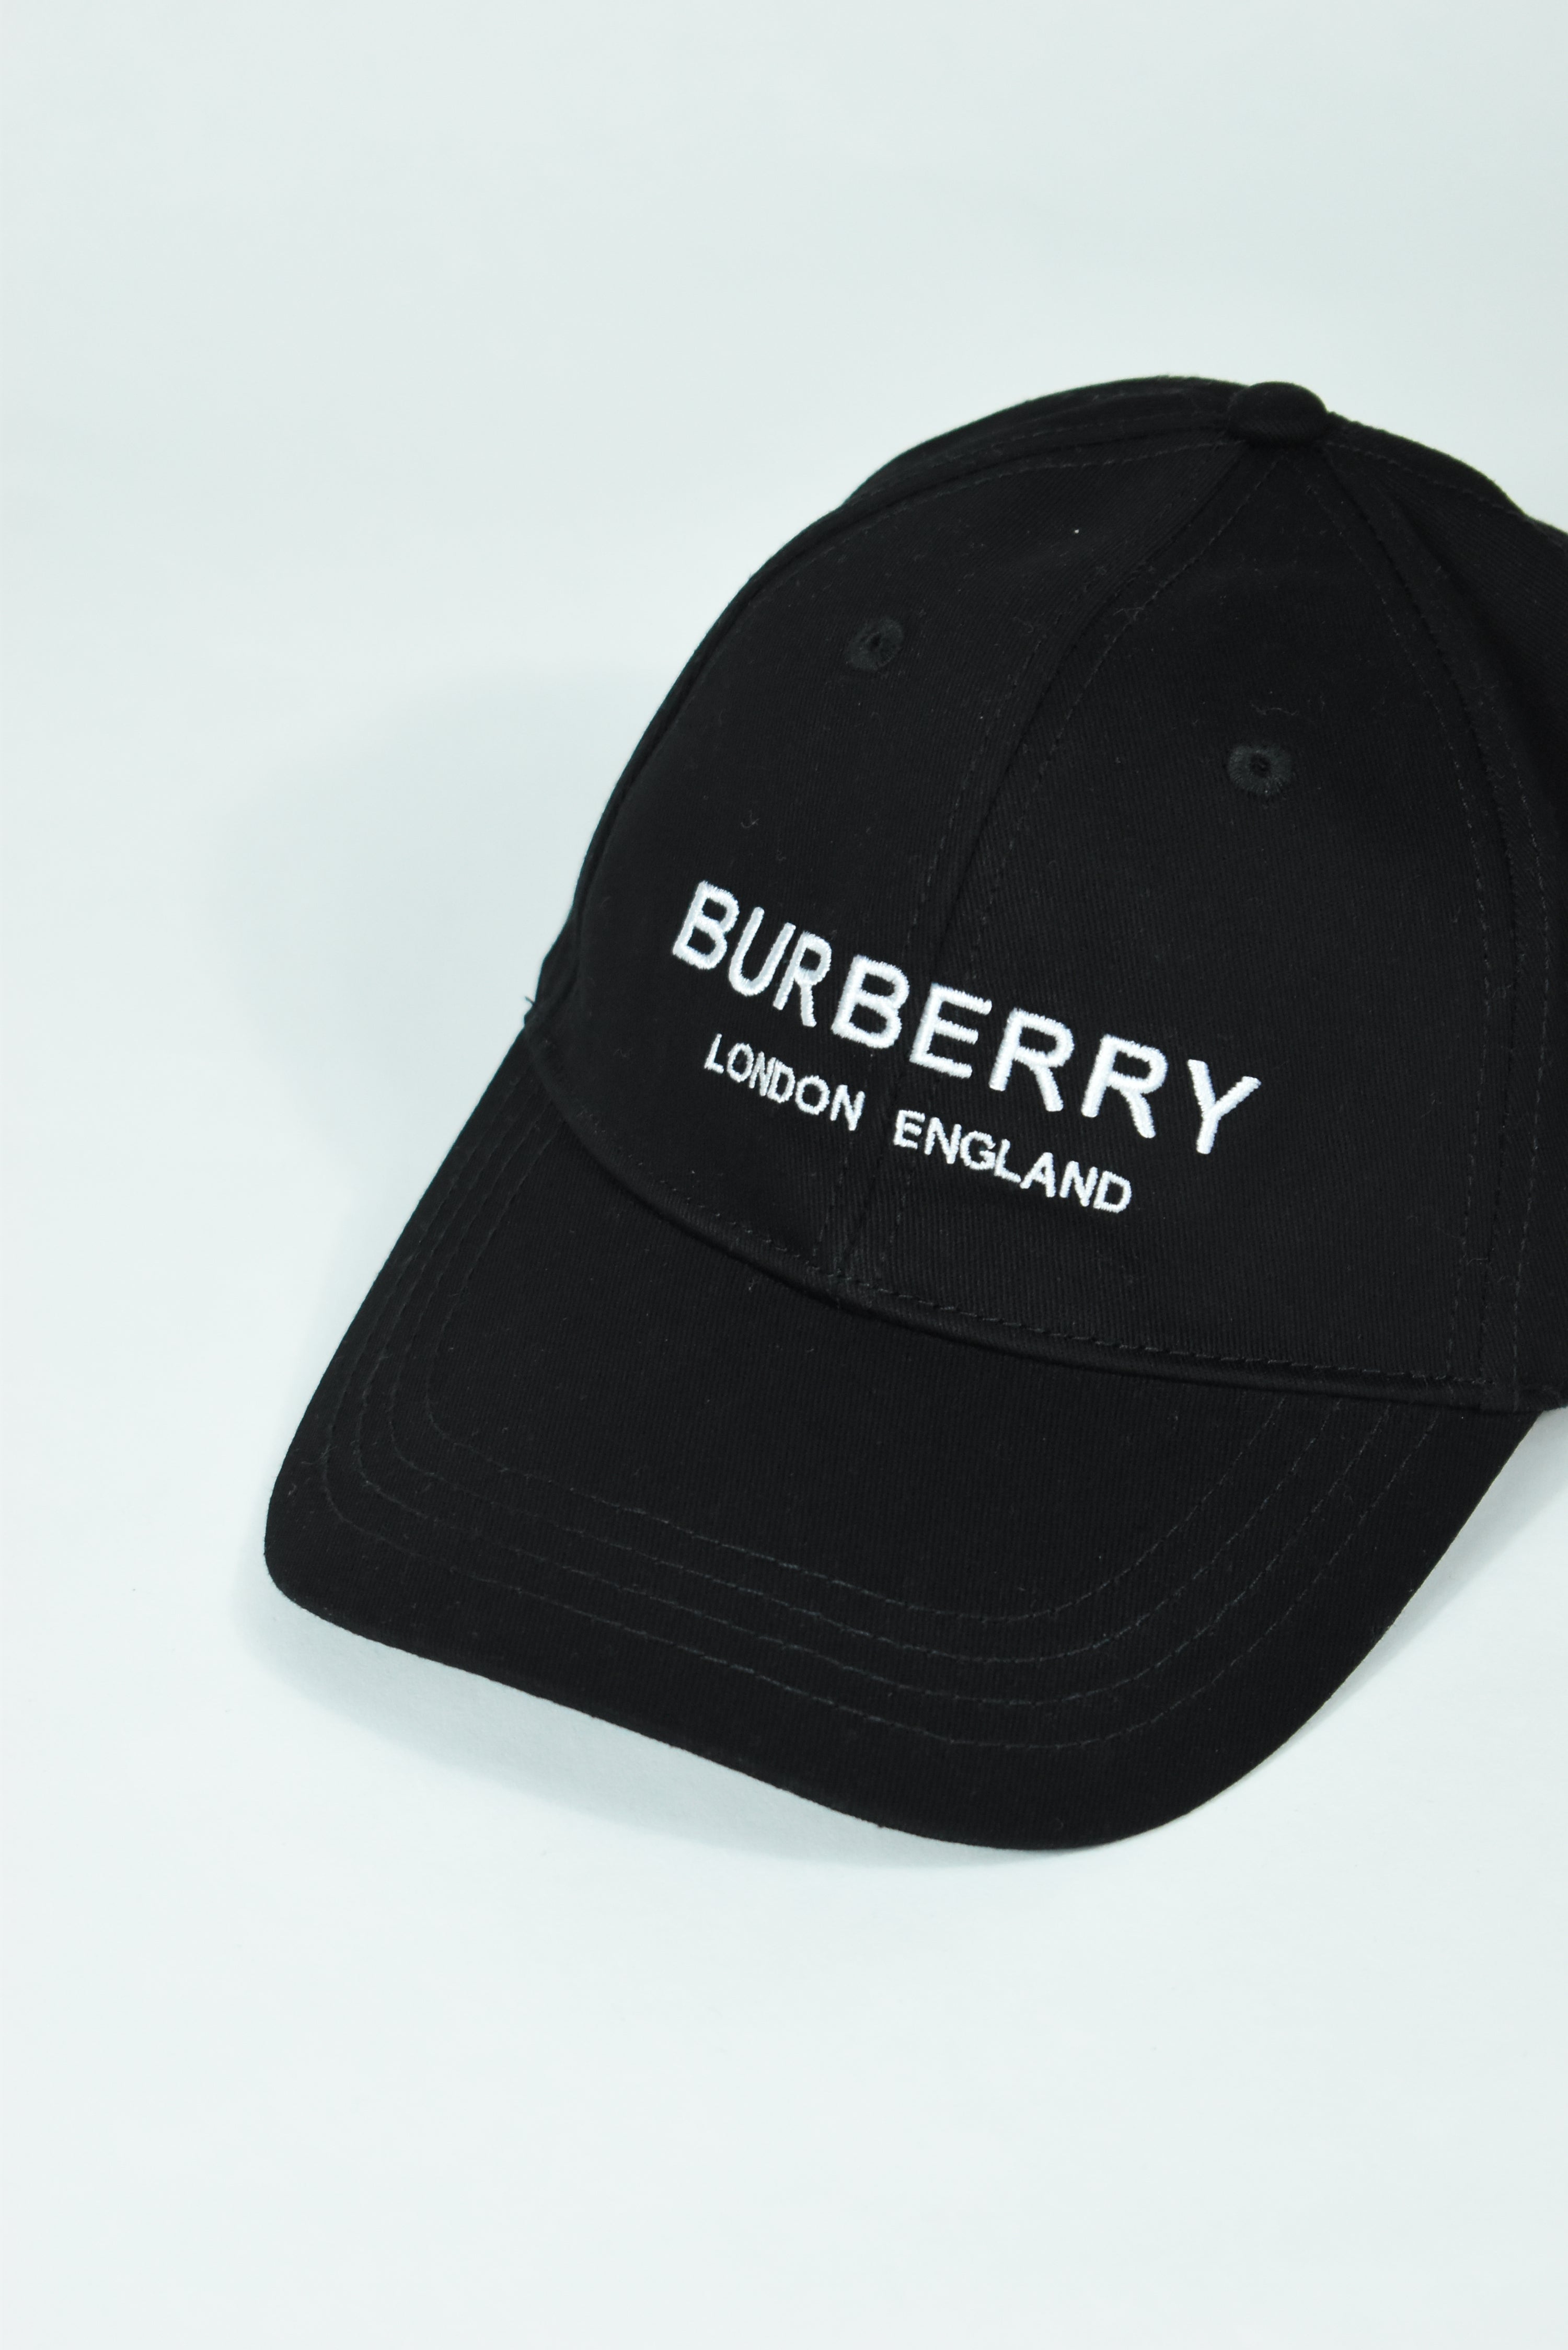 New Black Burberry London Embroidery Cap